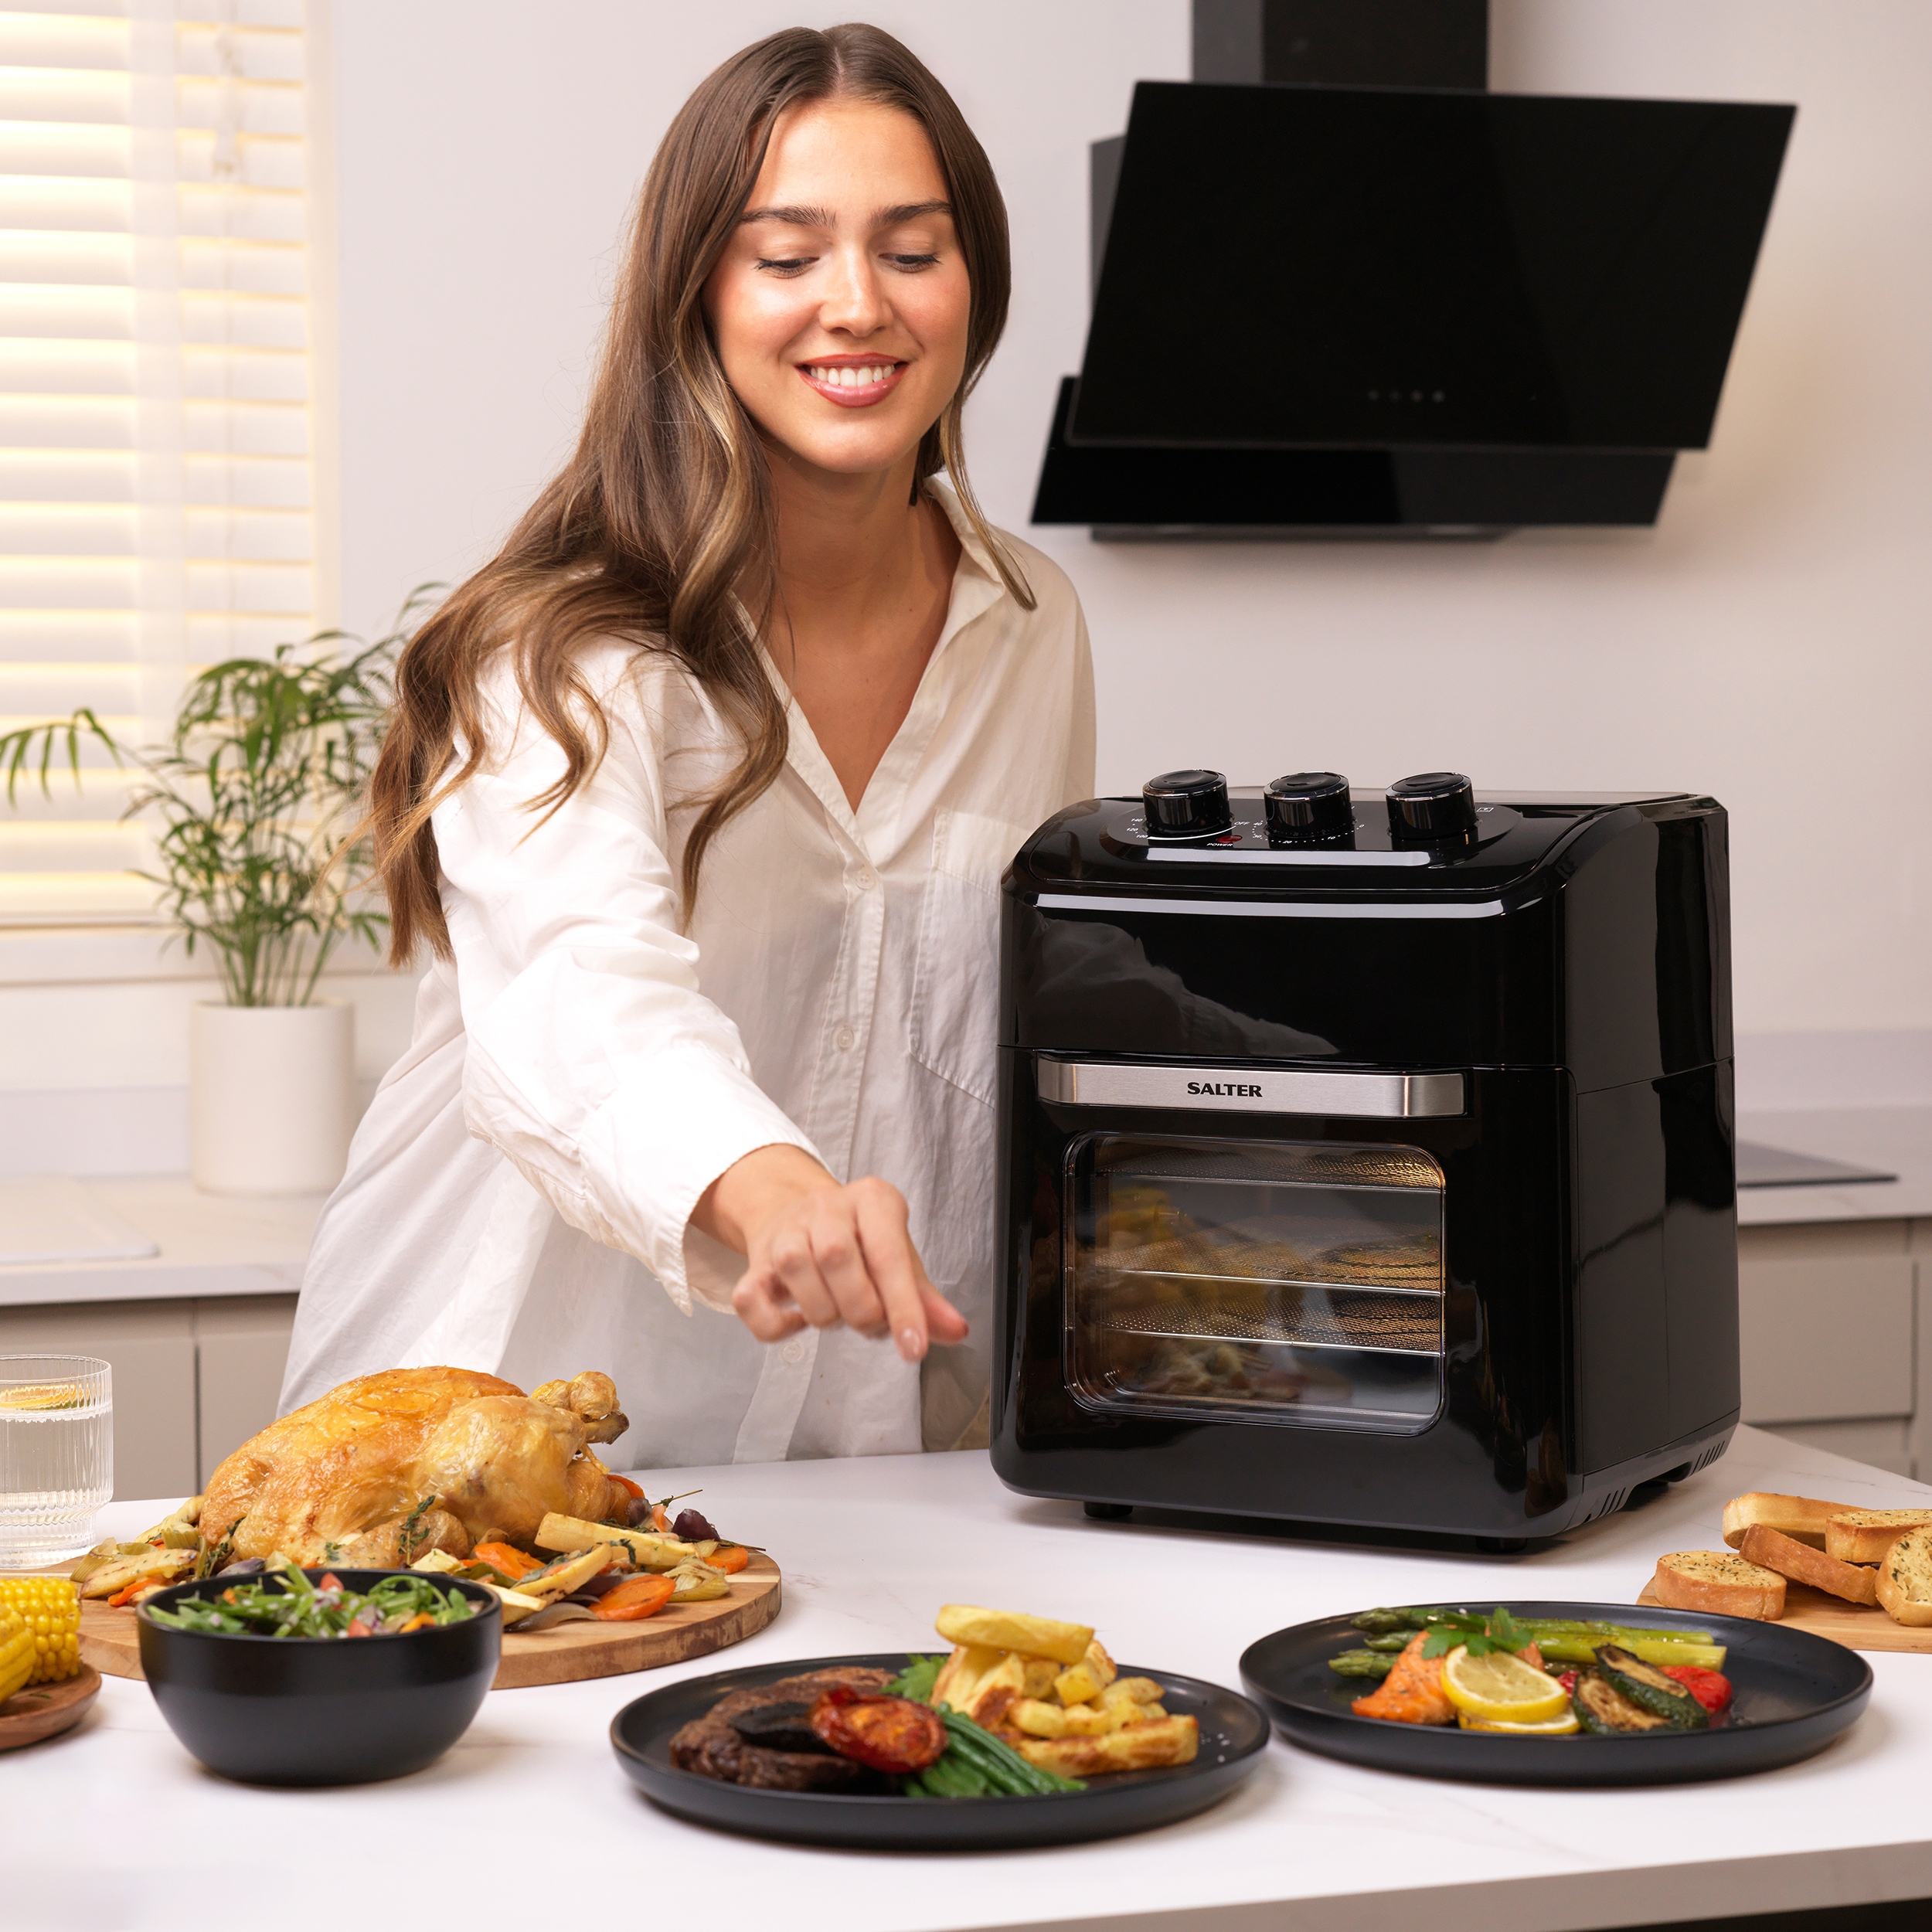 A woman using a Dual View Air Fryer oven in a kitchen